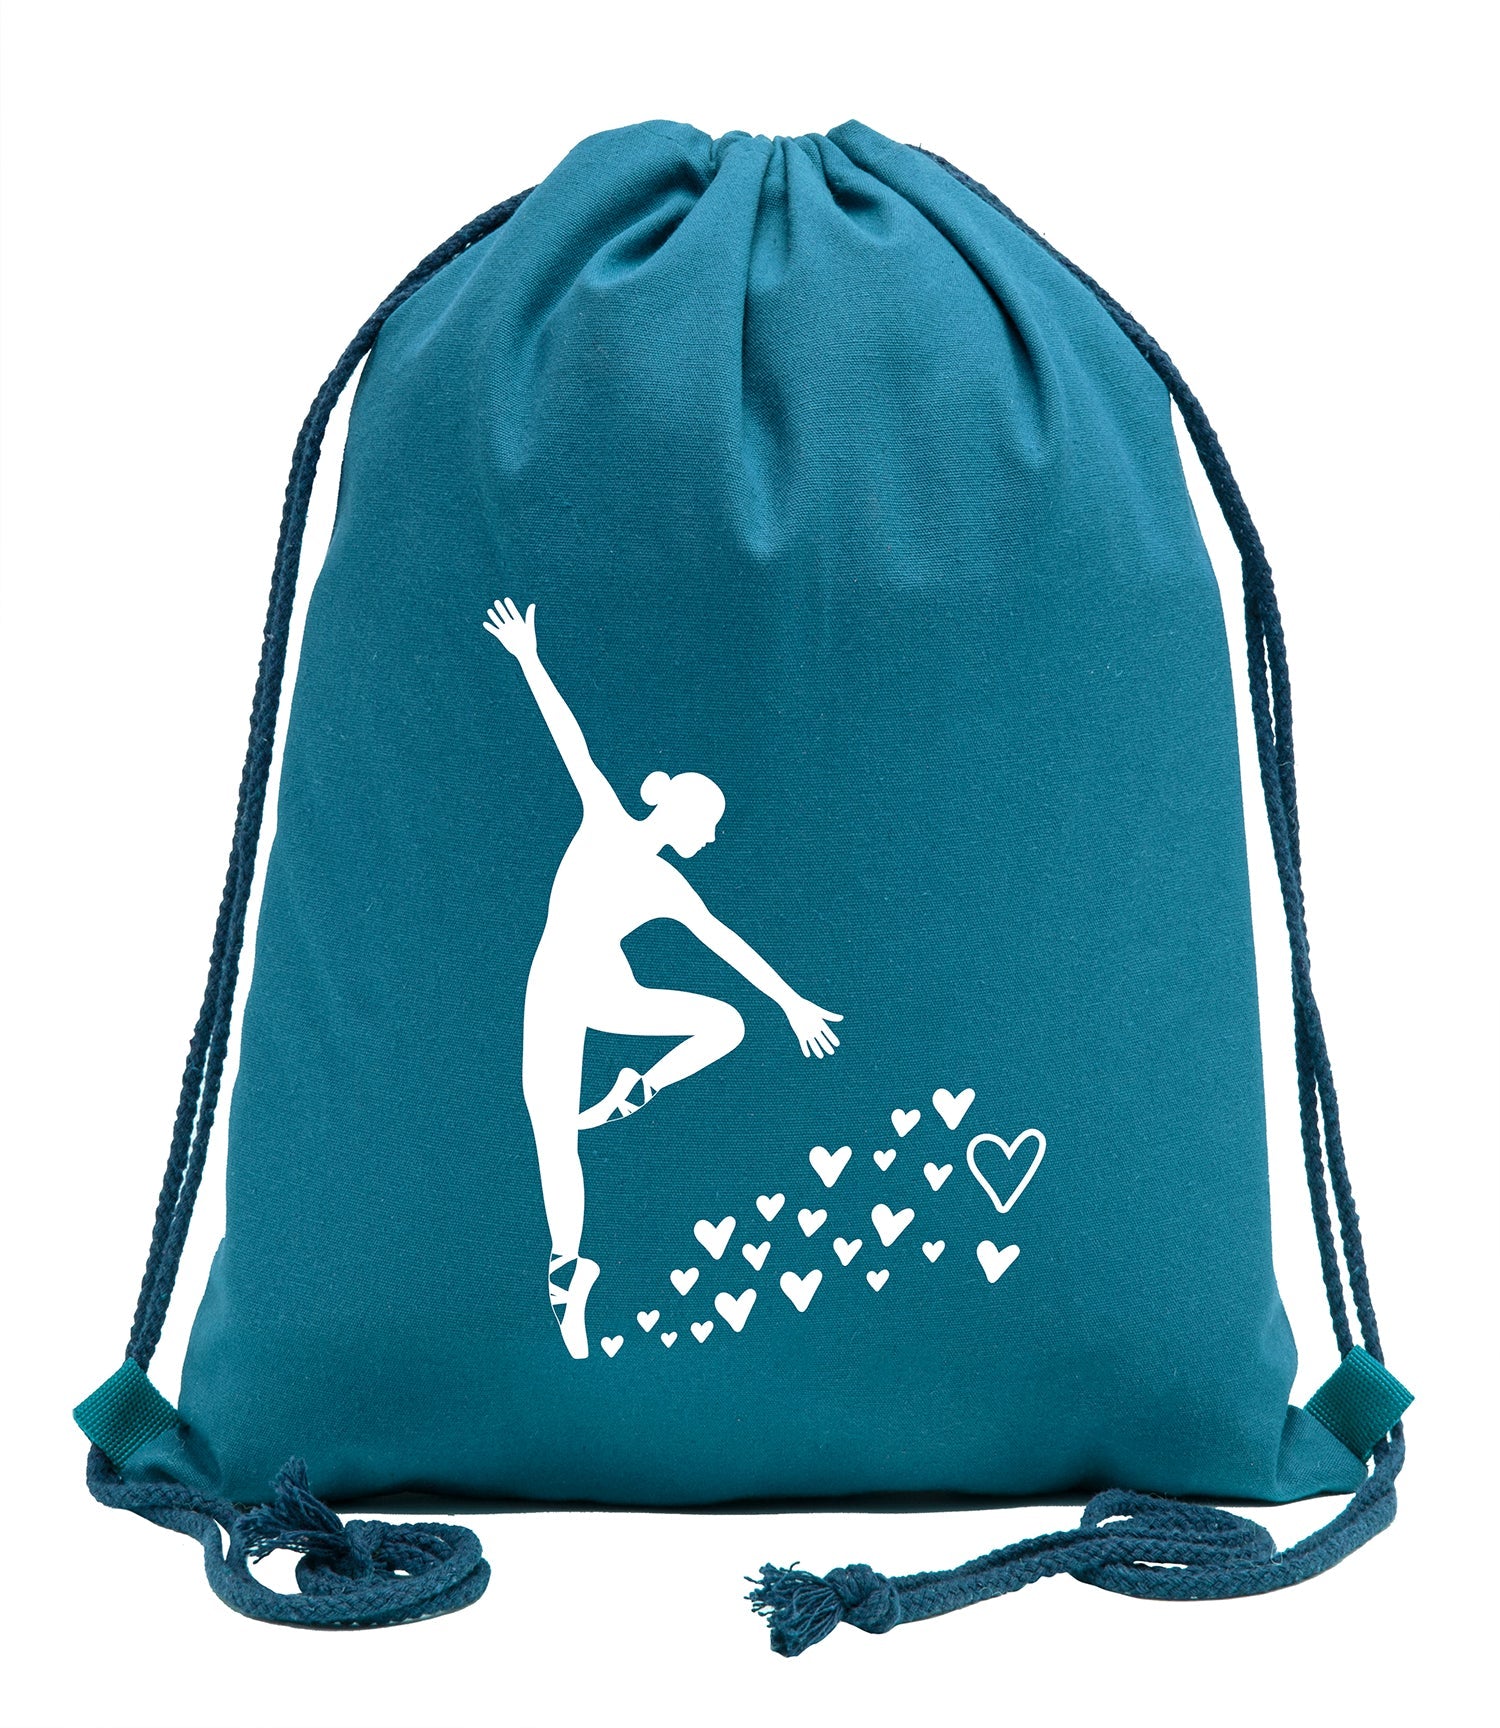 Accessory - Dance Bags, Ballet Backpacks For Girls, Dance Cotton Drawstring Cinch Backpacks - Hearts